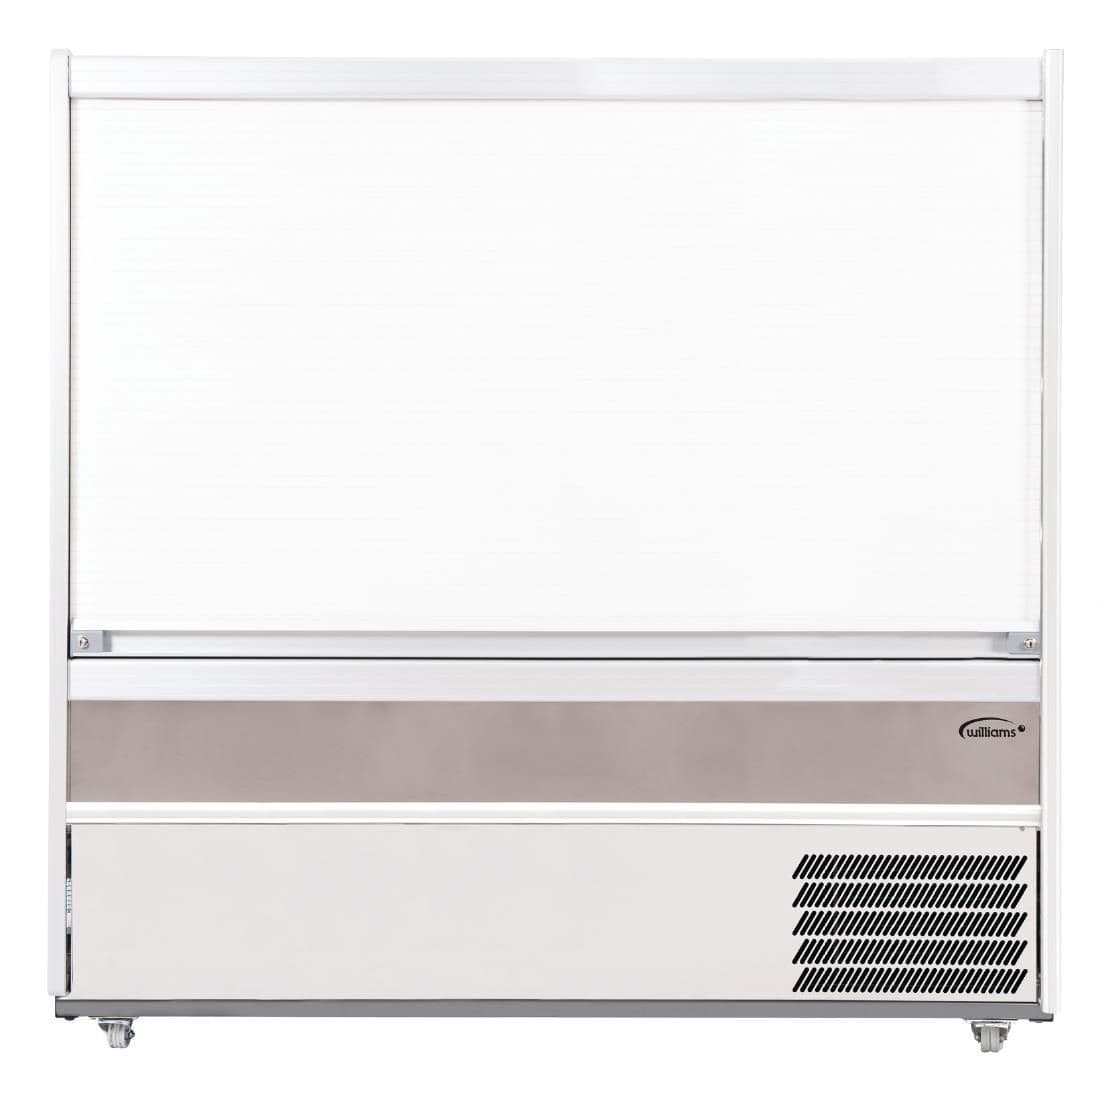 DP474 Williams Gem 1856mm Slimline Multideck Stainless Steel with Security Shutter R180-SCS JD Catering Equipment Solutions Ltd